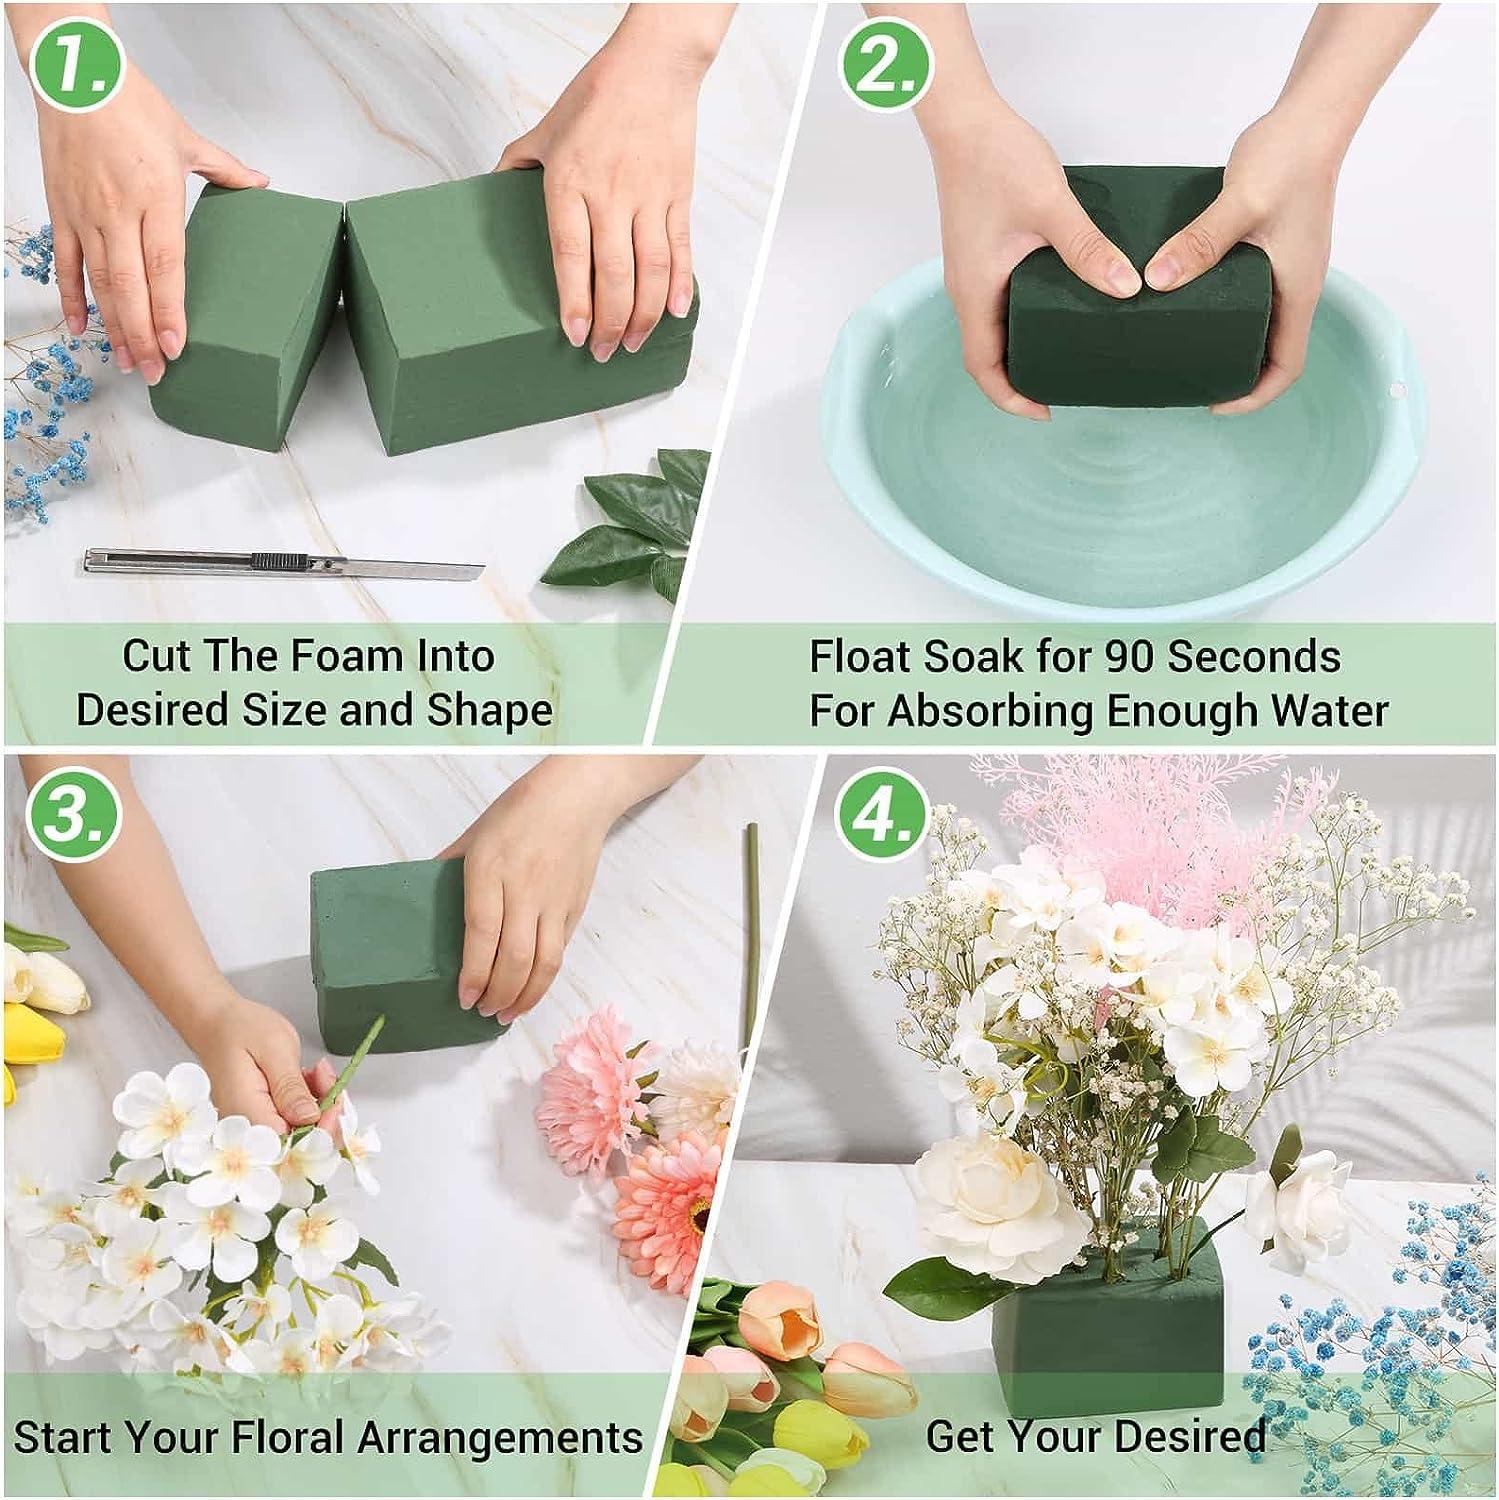 6 Pcs Floral Foam Blocks for Flower Arrangement (Larger Size 9 L x 4.3 W x  3 H) Wet and Dry Green Floral Foam for Wedding, Birthdays, Home Decorations